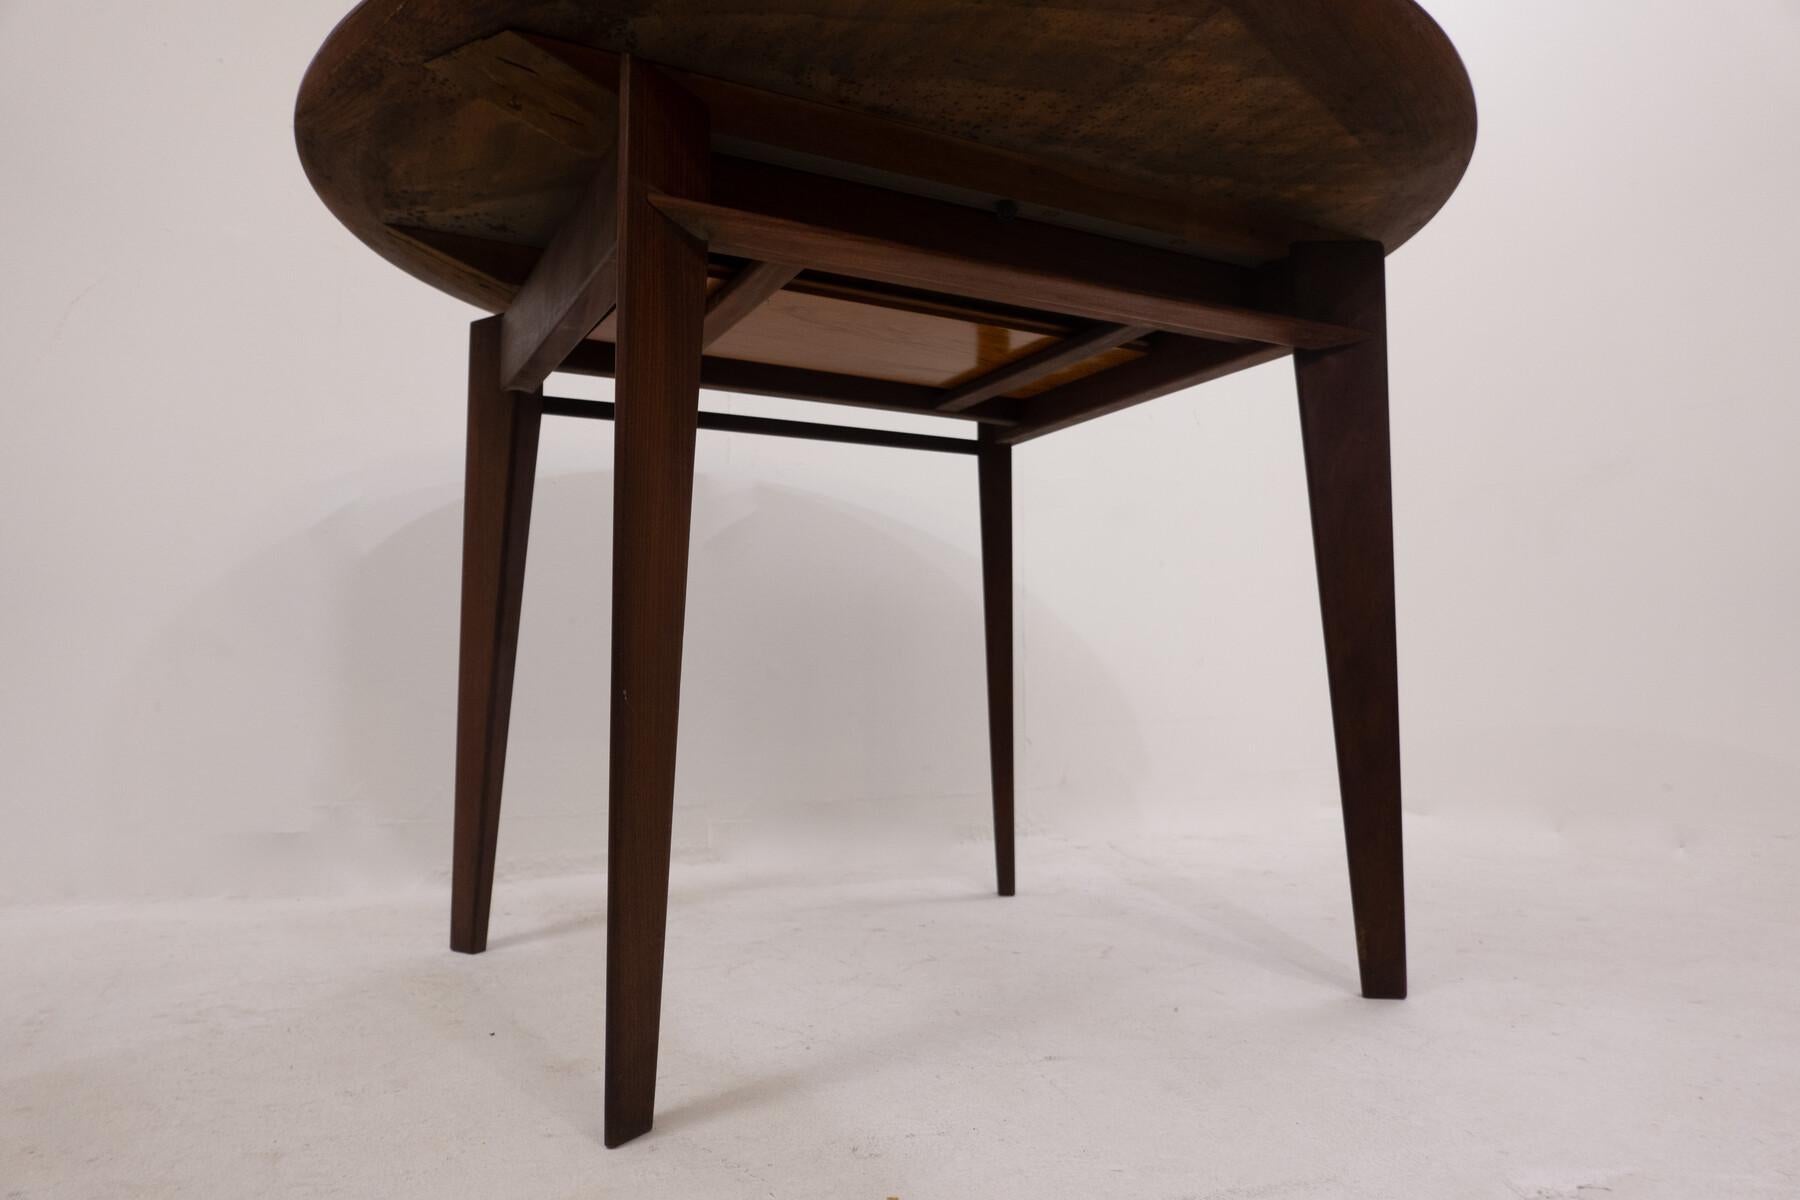 Mid-Century Modern Extending Dining Table by Vittorio Dassi, Teak, Italy, 1950s For Sale 1